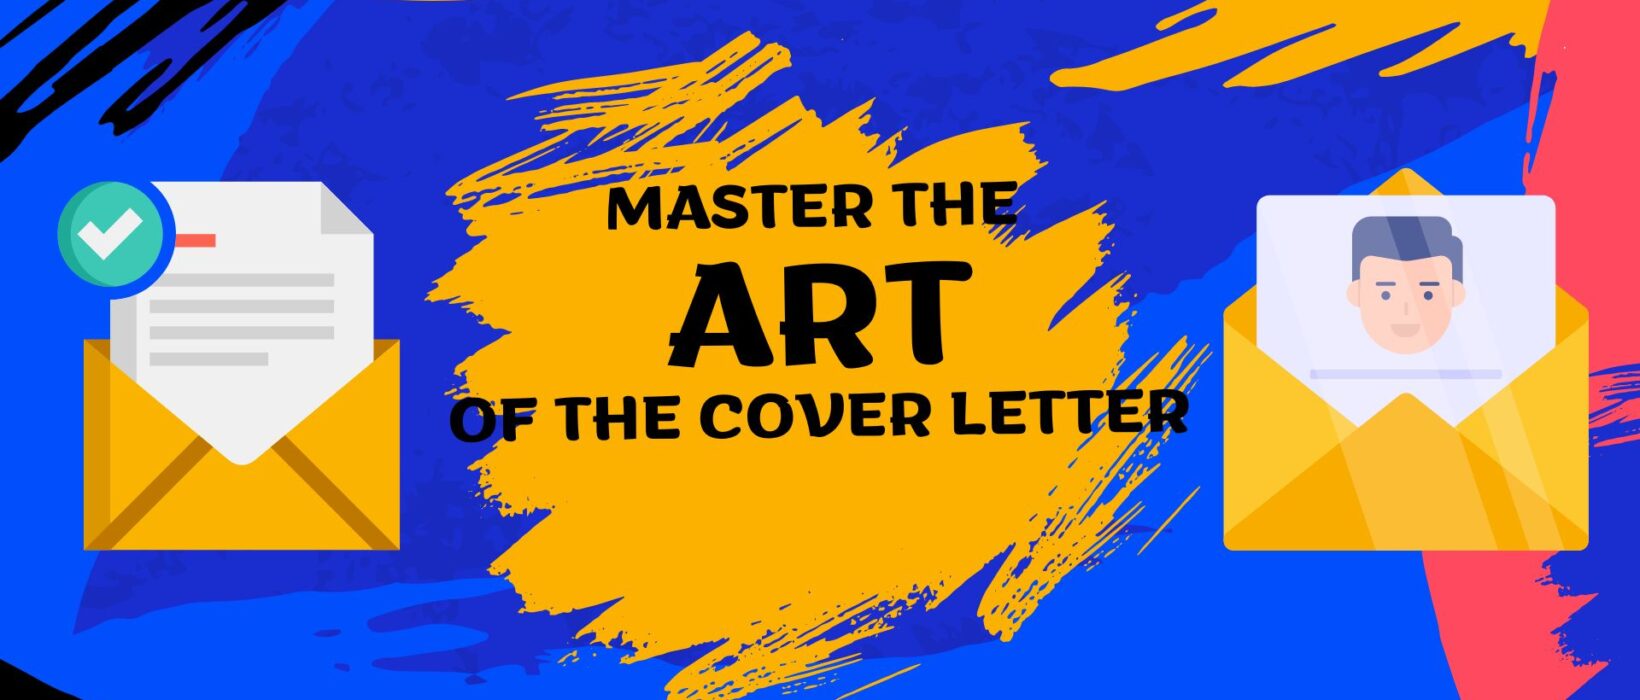 Master the Art of the Cover Letter: Your Key to Standing Out in Job Applications